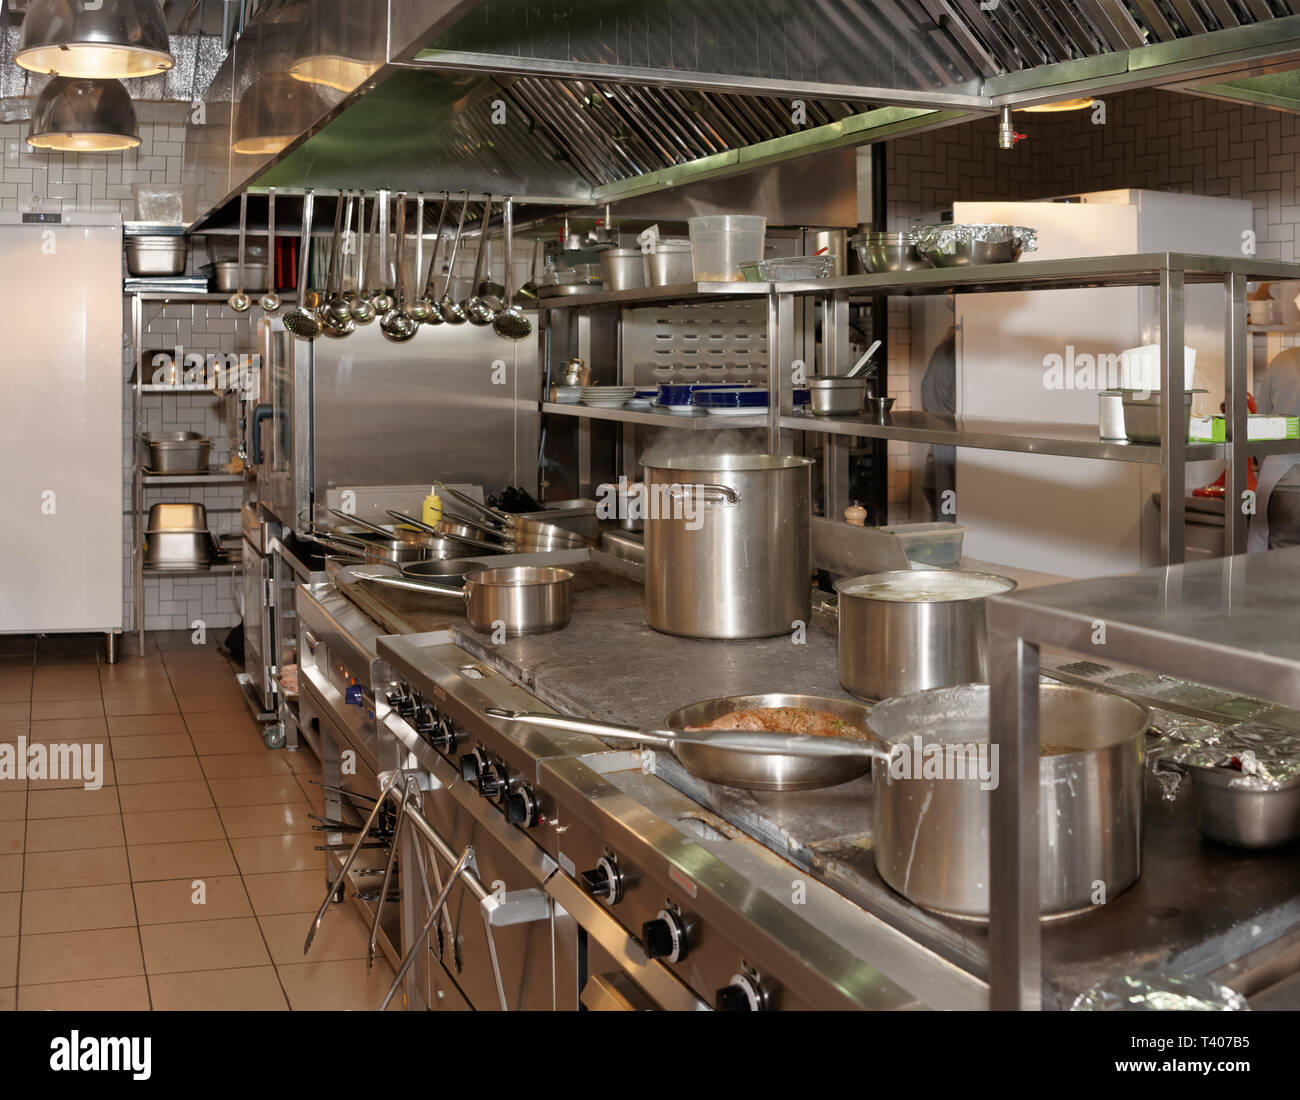 Kitchen of a restaurant shot in operation Stock Photo